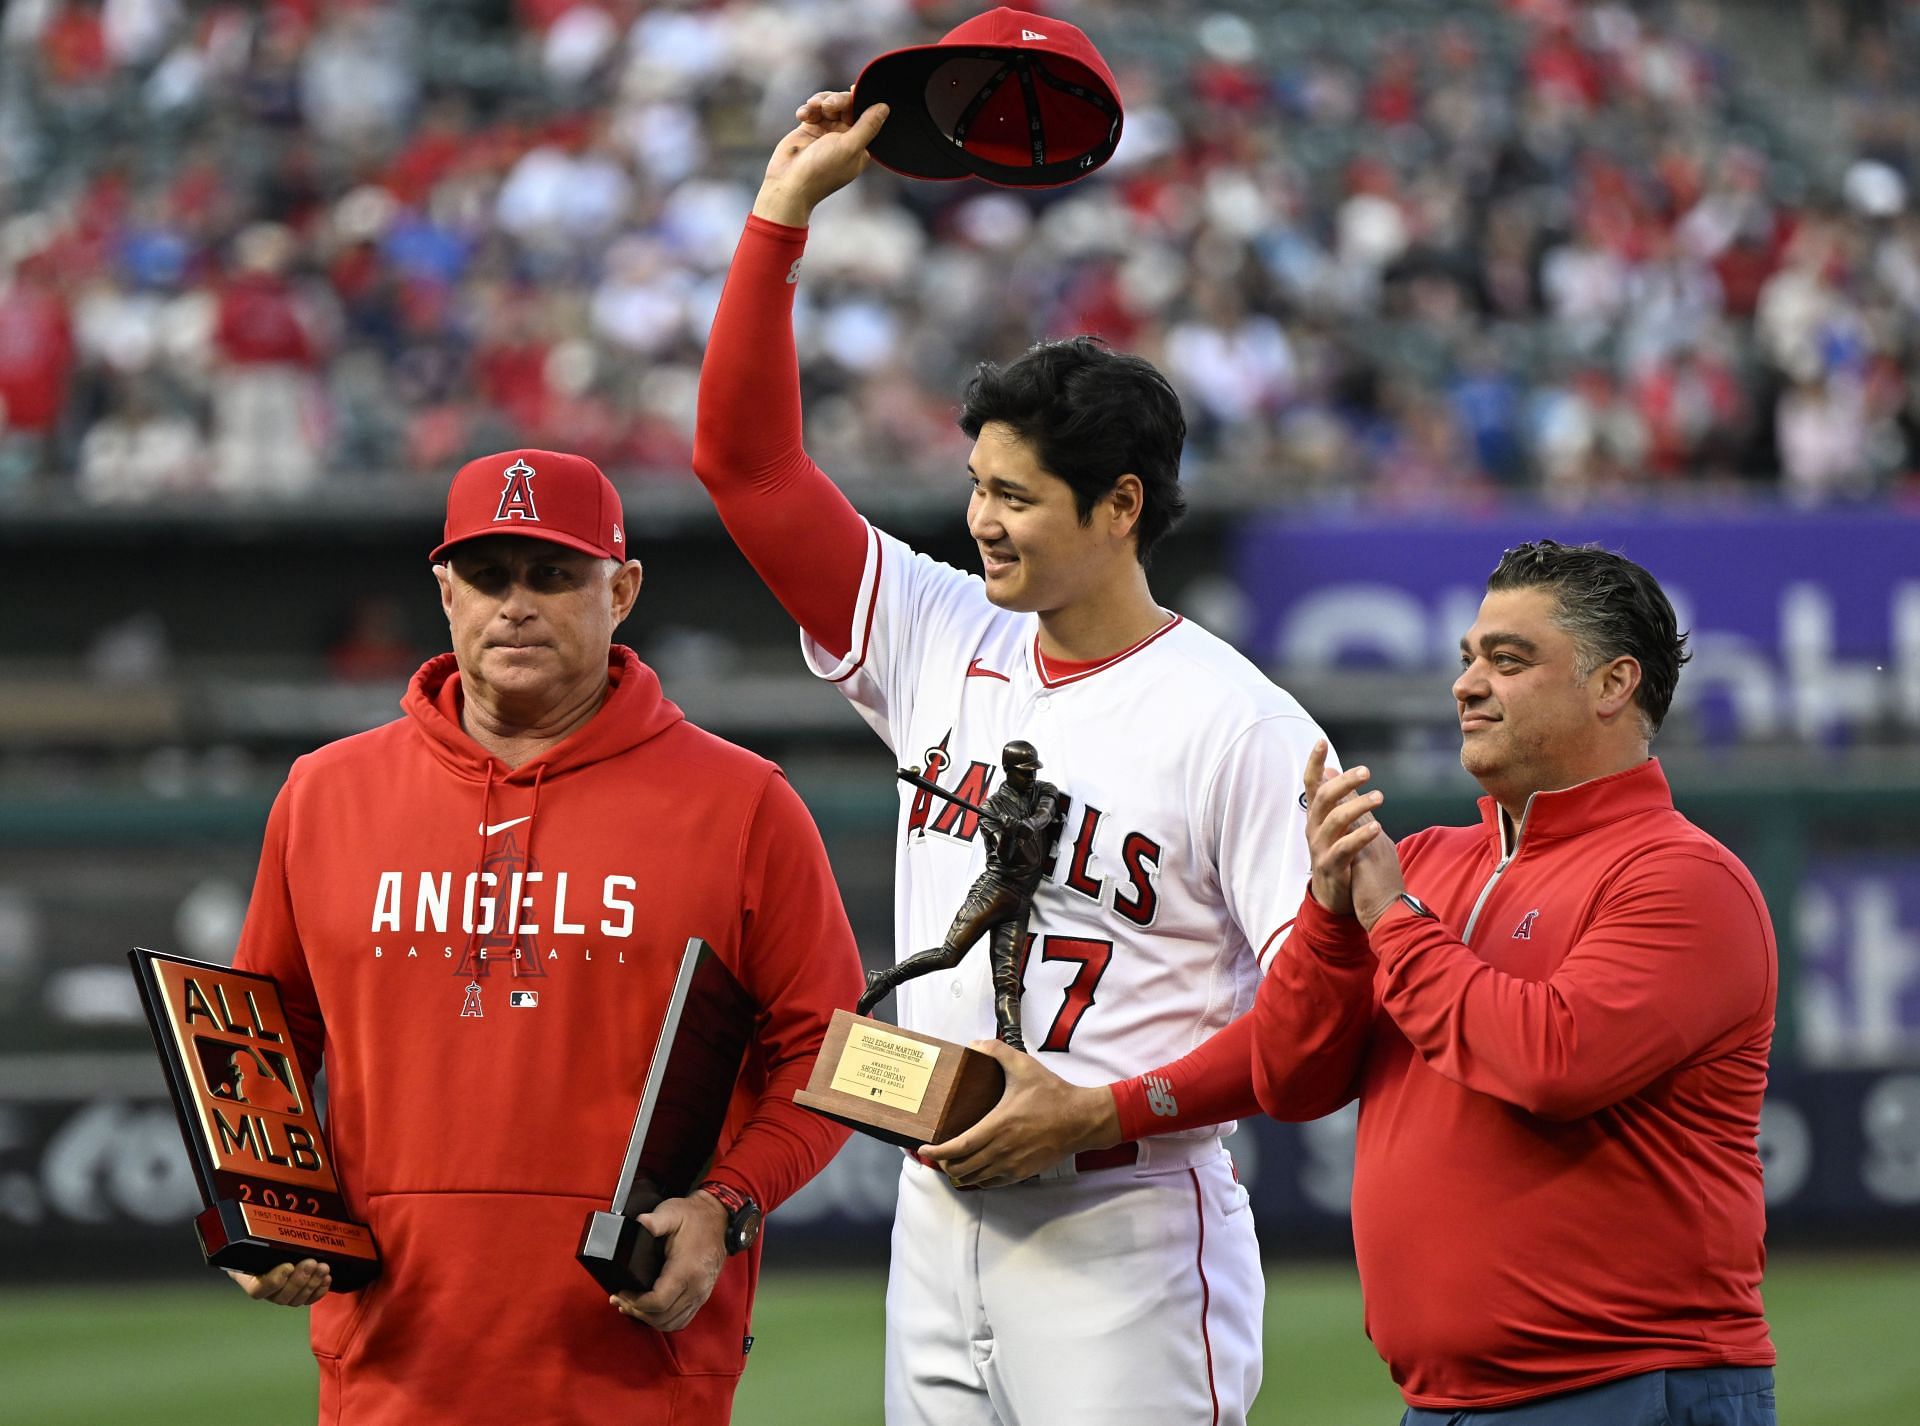 Departing Fighters manager helped Shohei Ohtani find his footing